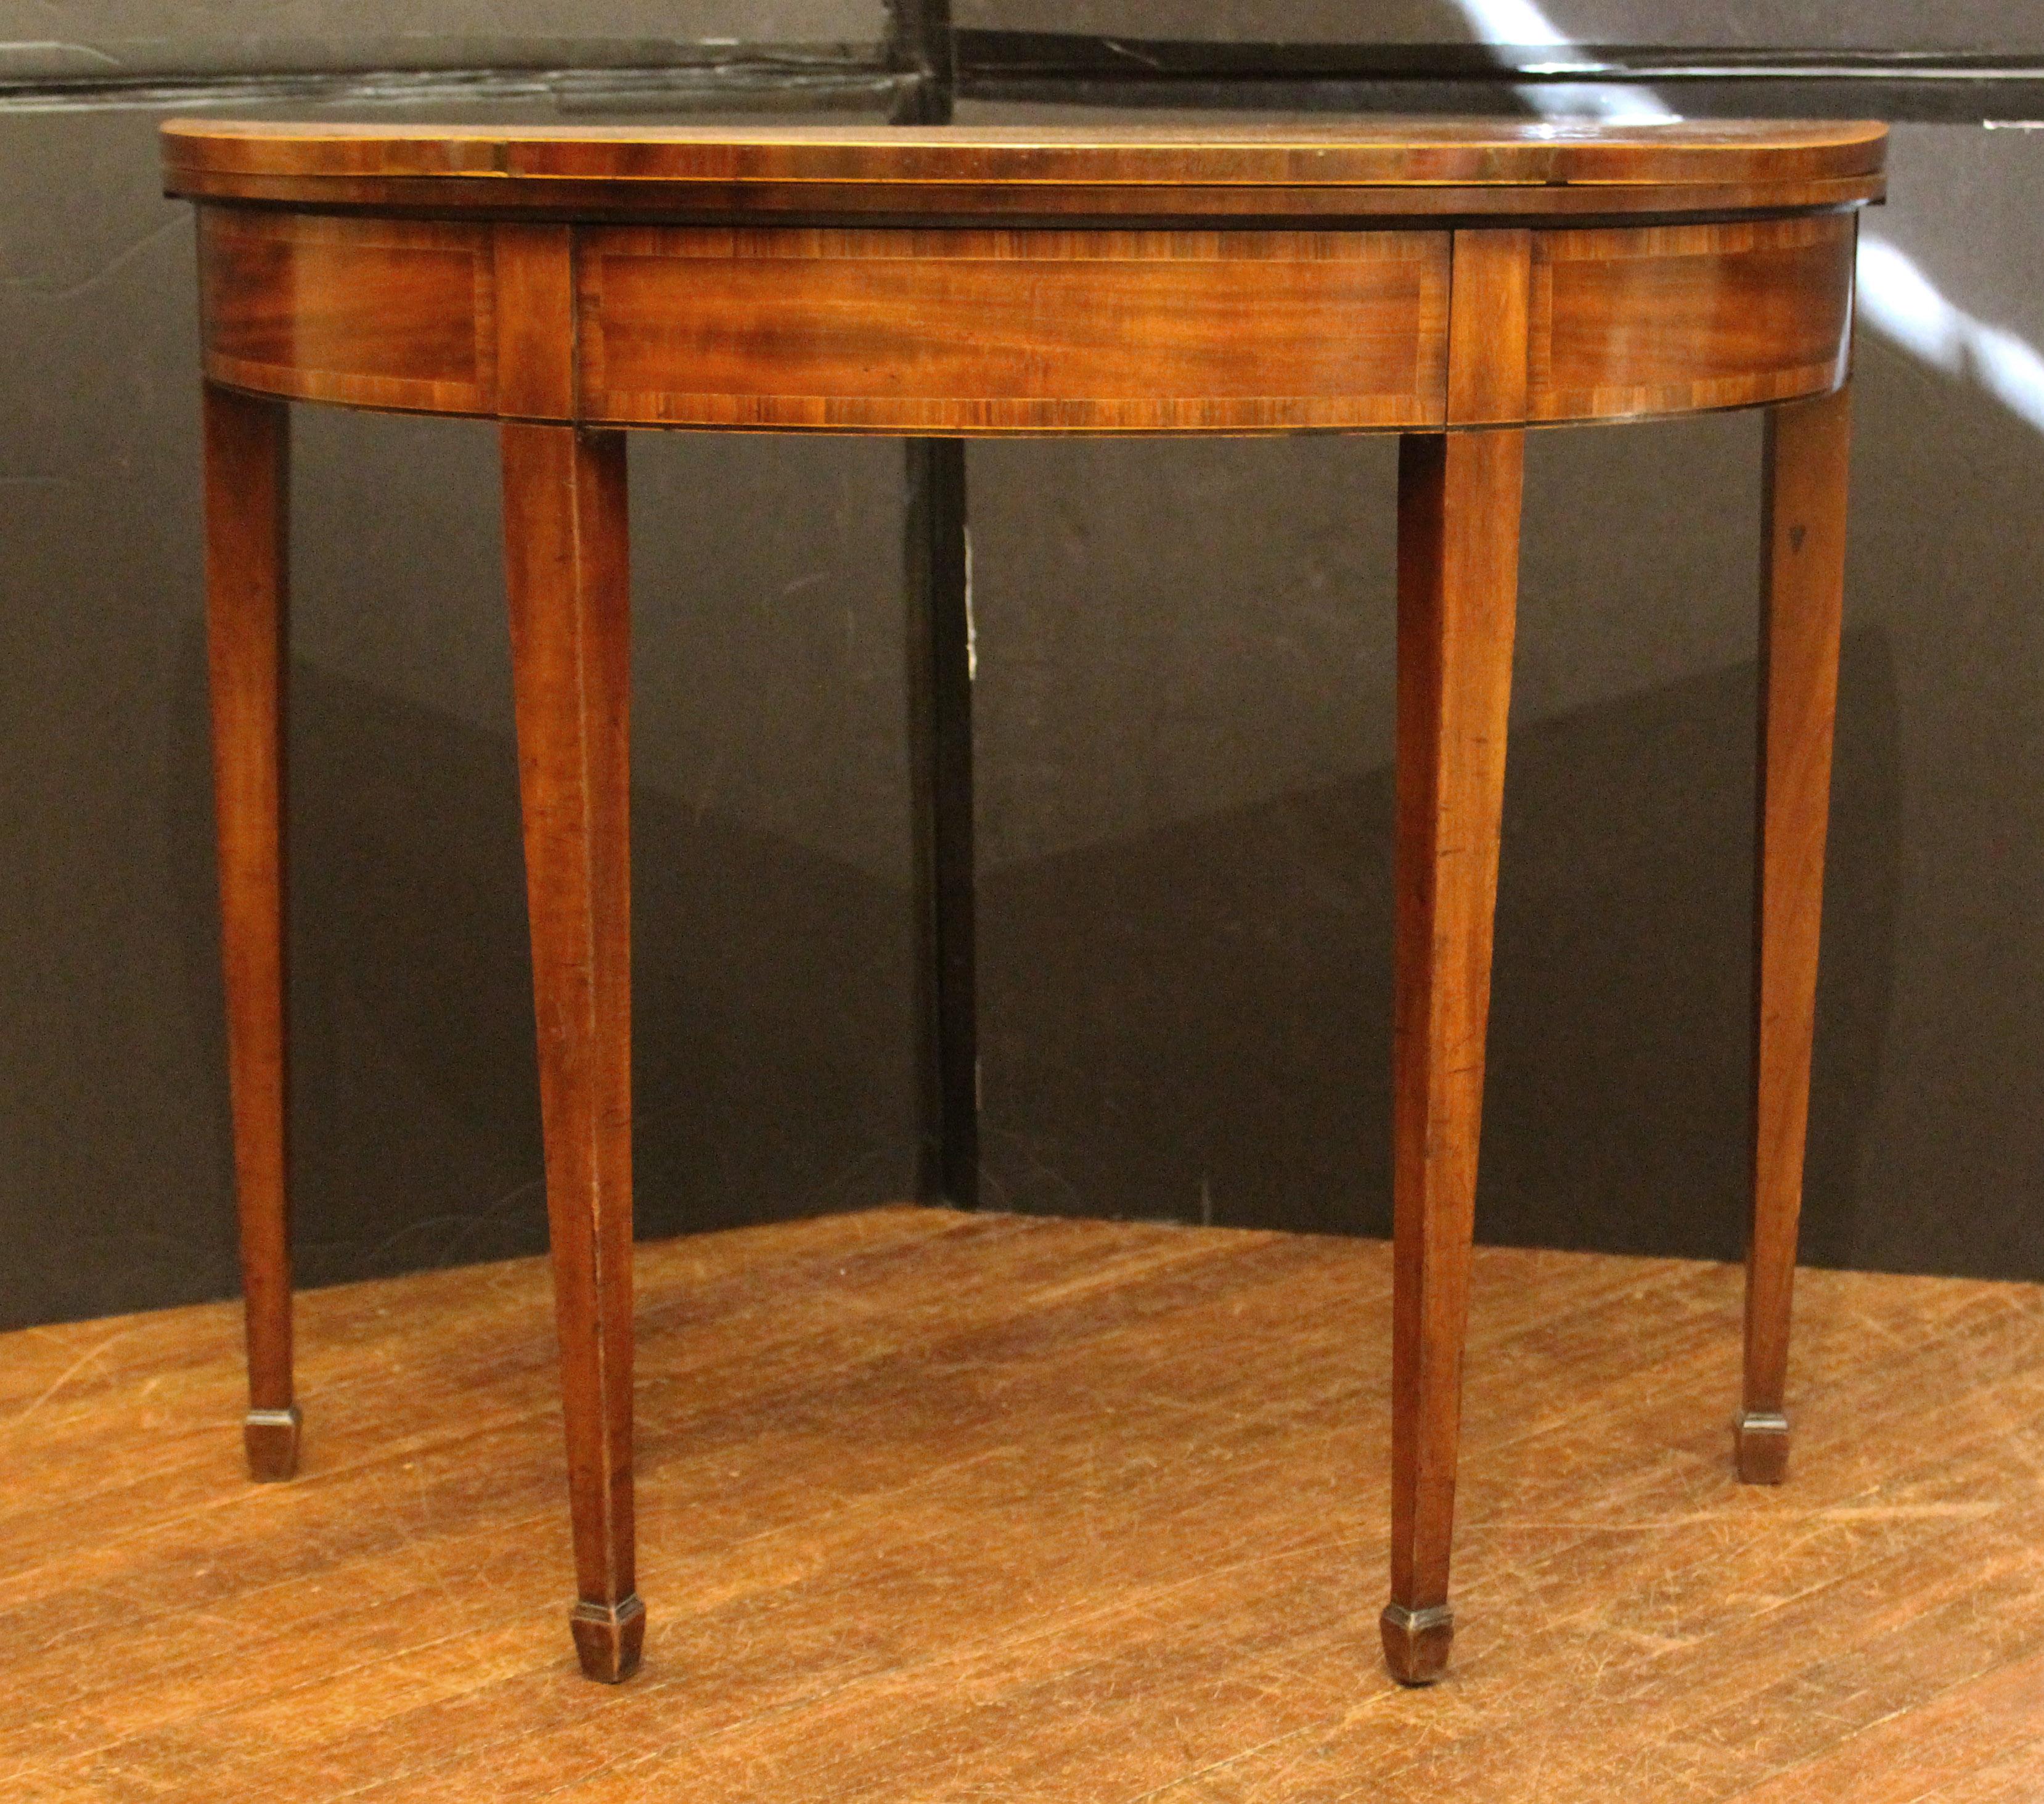 Circa 1780 George III demilune games table, English. Neoclassical. Well figured mahogany top and aprong sections each crossbanded with zebra wood and satinwood stringing. Lines of boxwood & ebony line the apron edge. Straight, tapered legs ending in